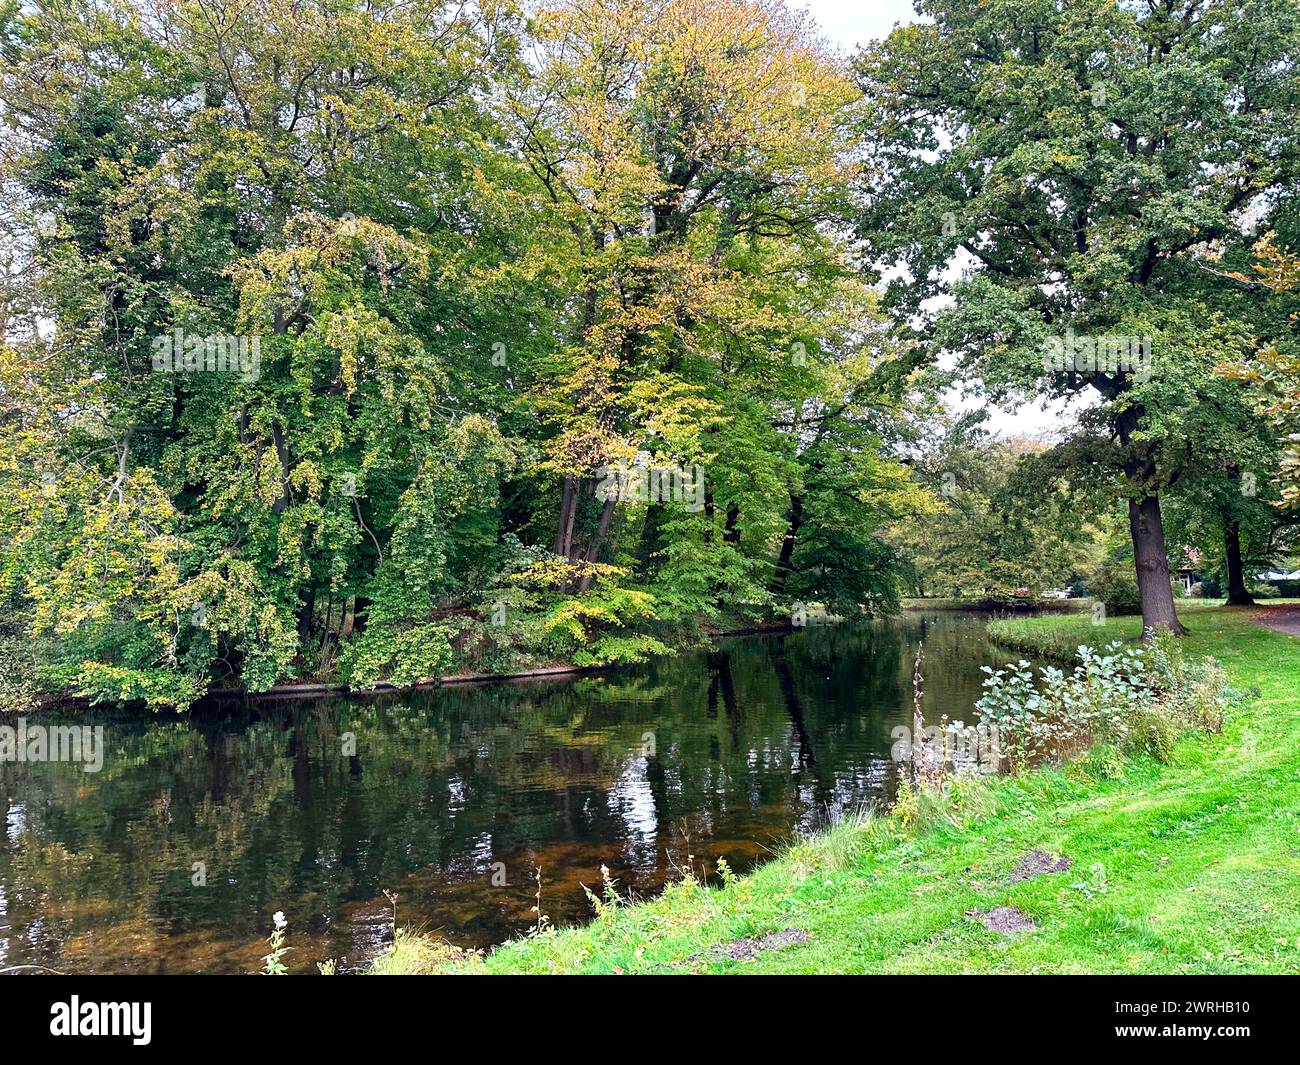 Beautiful water channel and different plants in park Stock Photo